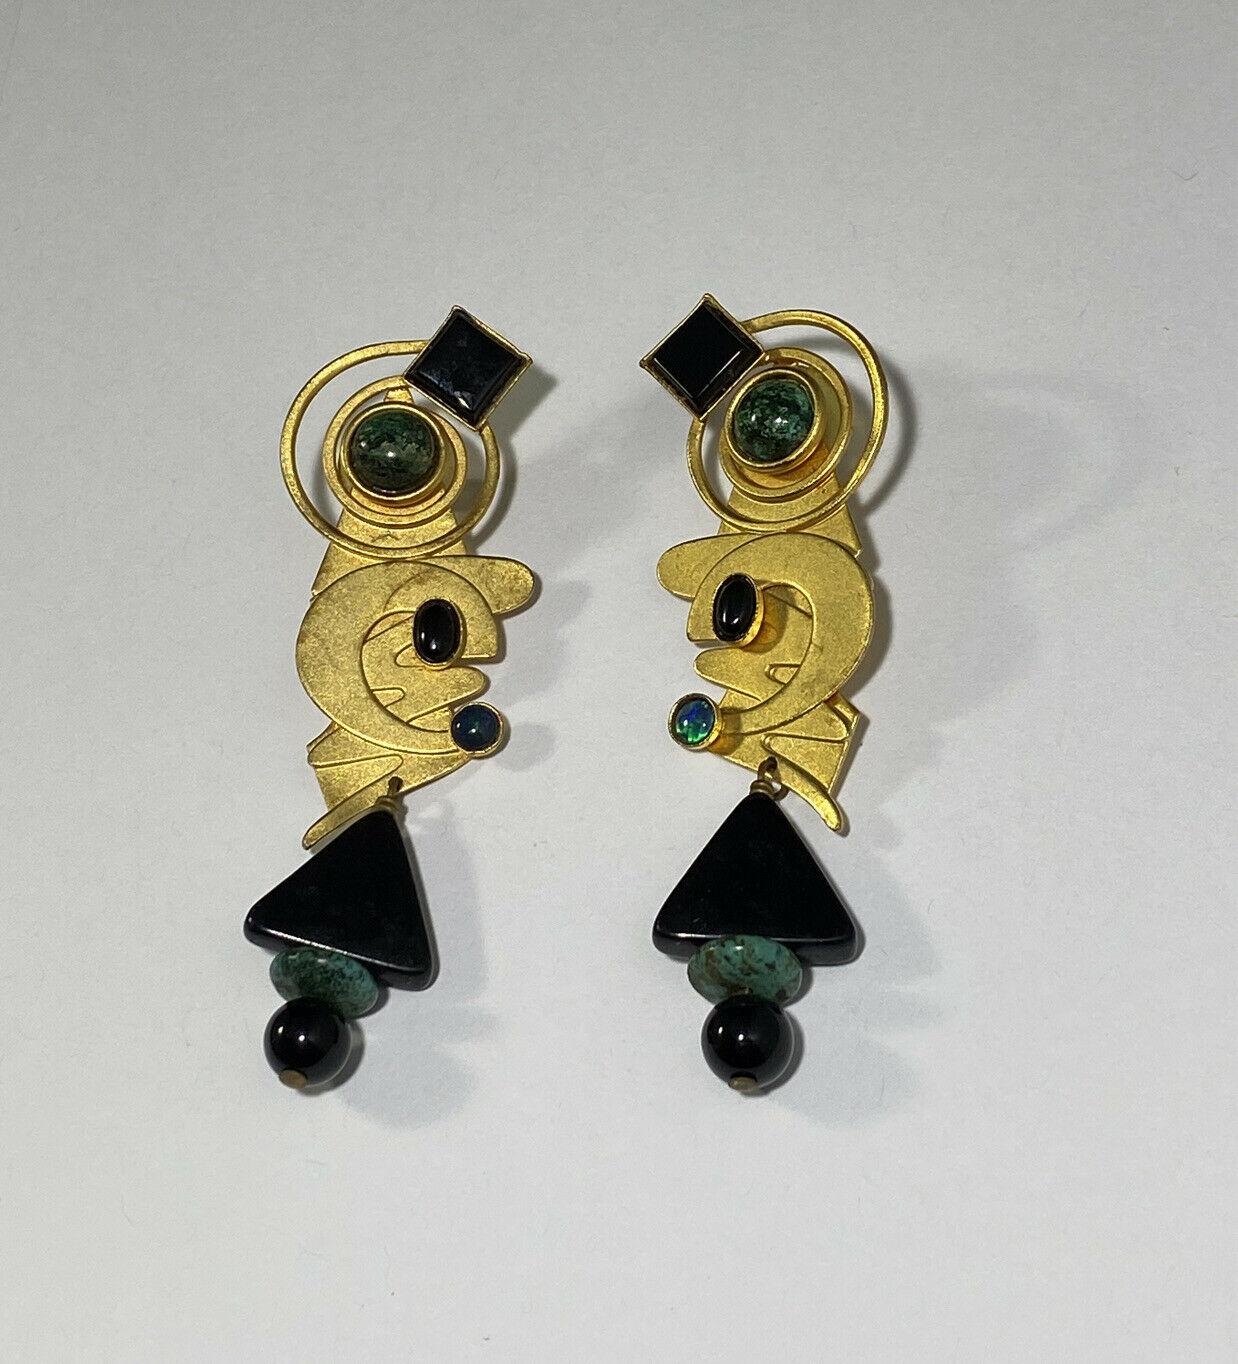 Fabulous Signed Gale Rothstein Designer Modernist Natural Stones Dangle earrings. Striking Abstract design. Measuring approx. 3” long. Signed on back: Gale Rothstein. More Beautiful in real time...Sure to be admired complement to your outfit!